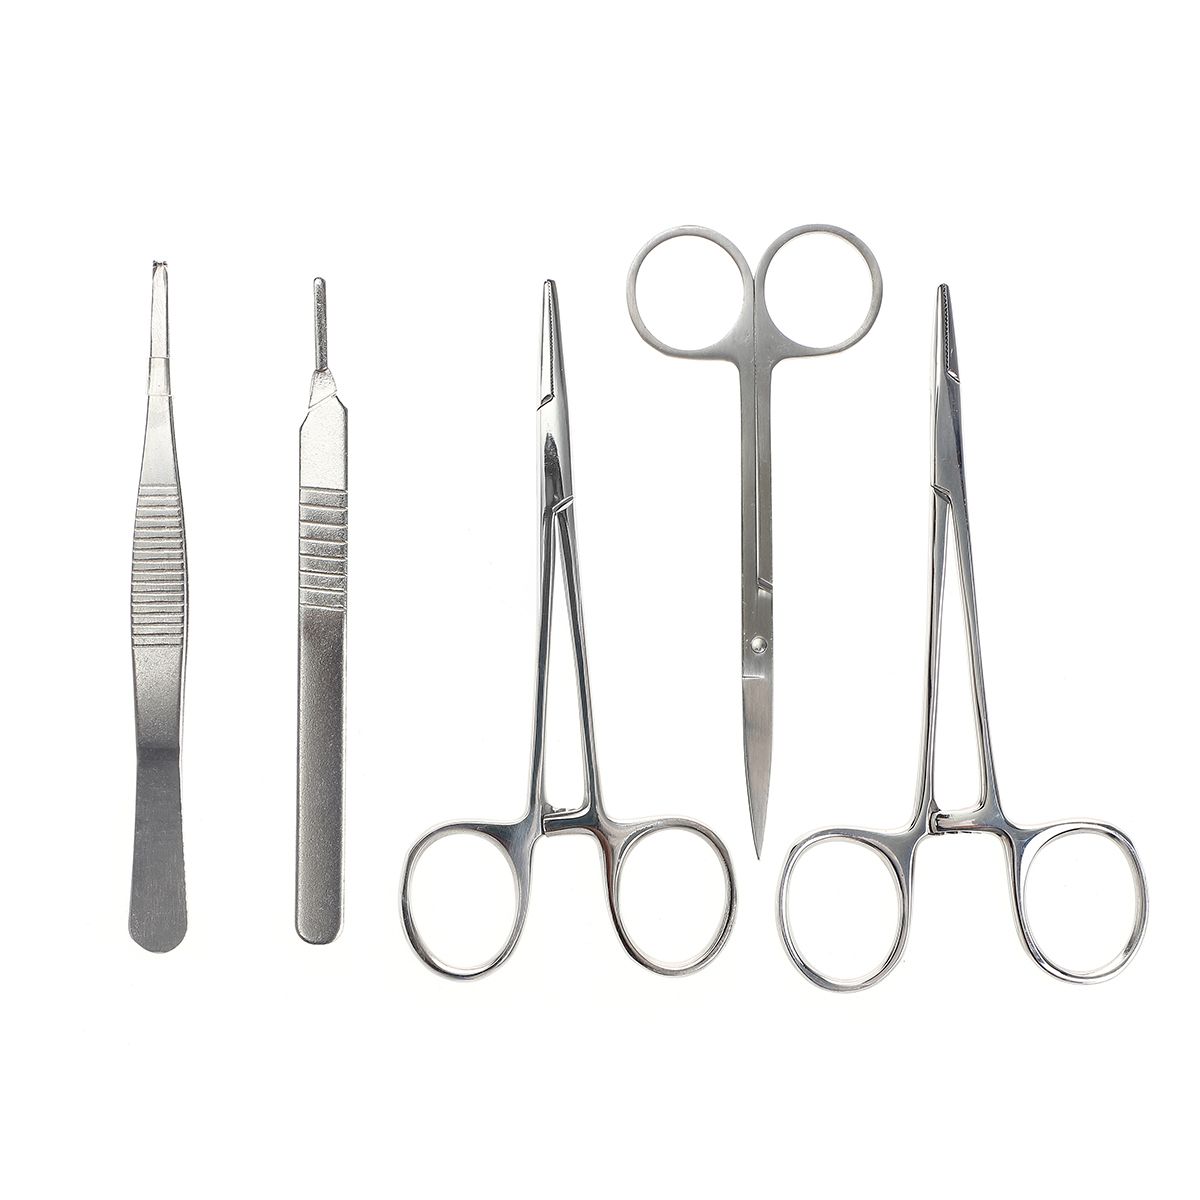 25-In-1-Skin-Suture-Surgical-Training-Kit-Silicone-Pad-Needle-Scissors-Tools-Kit-1417313